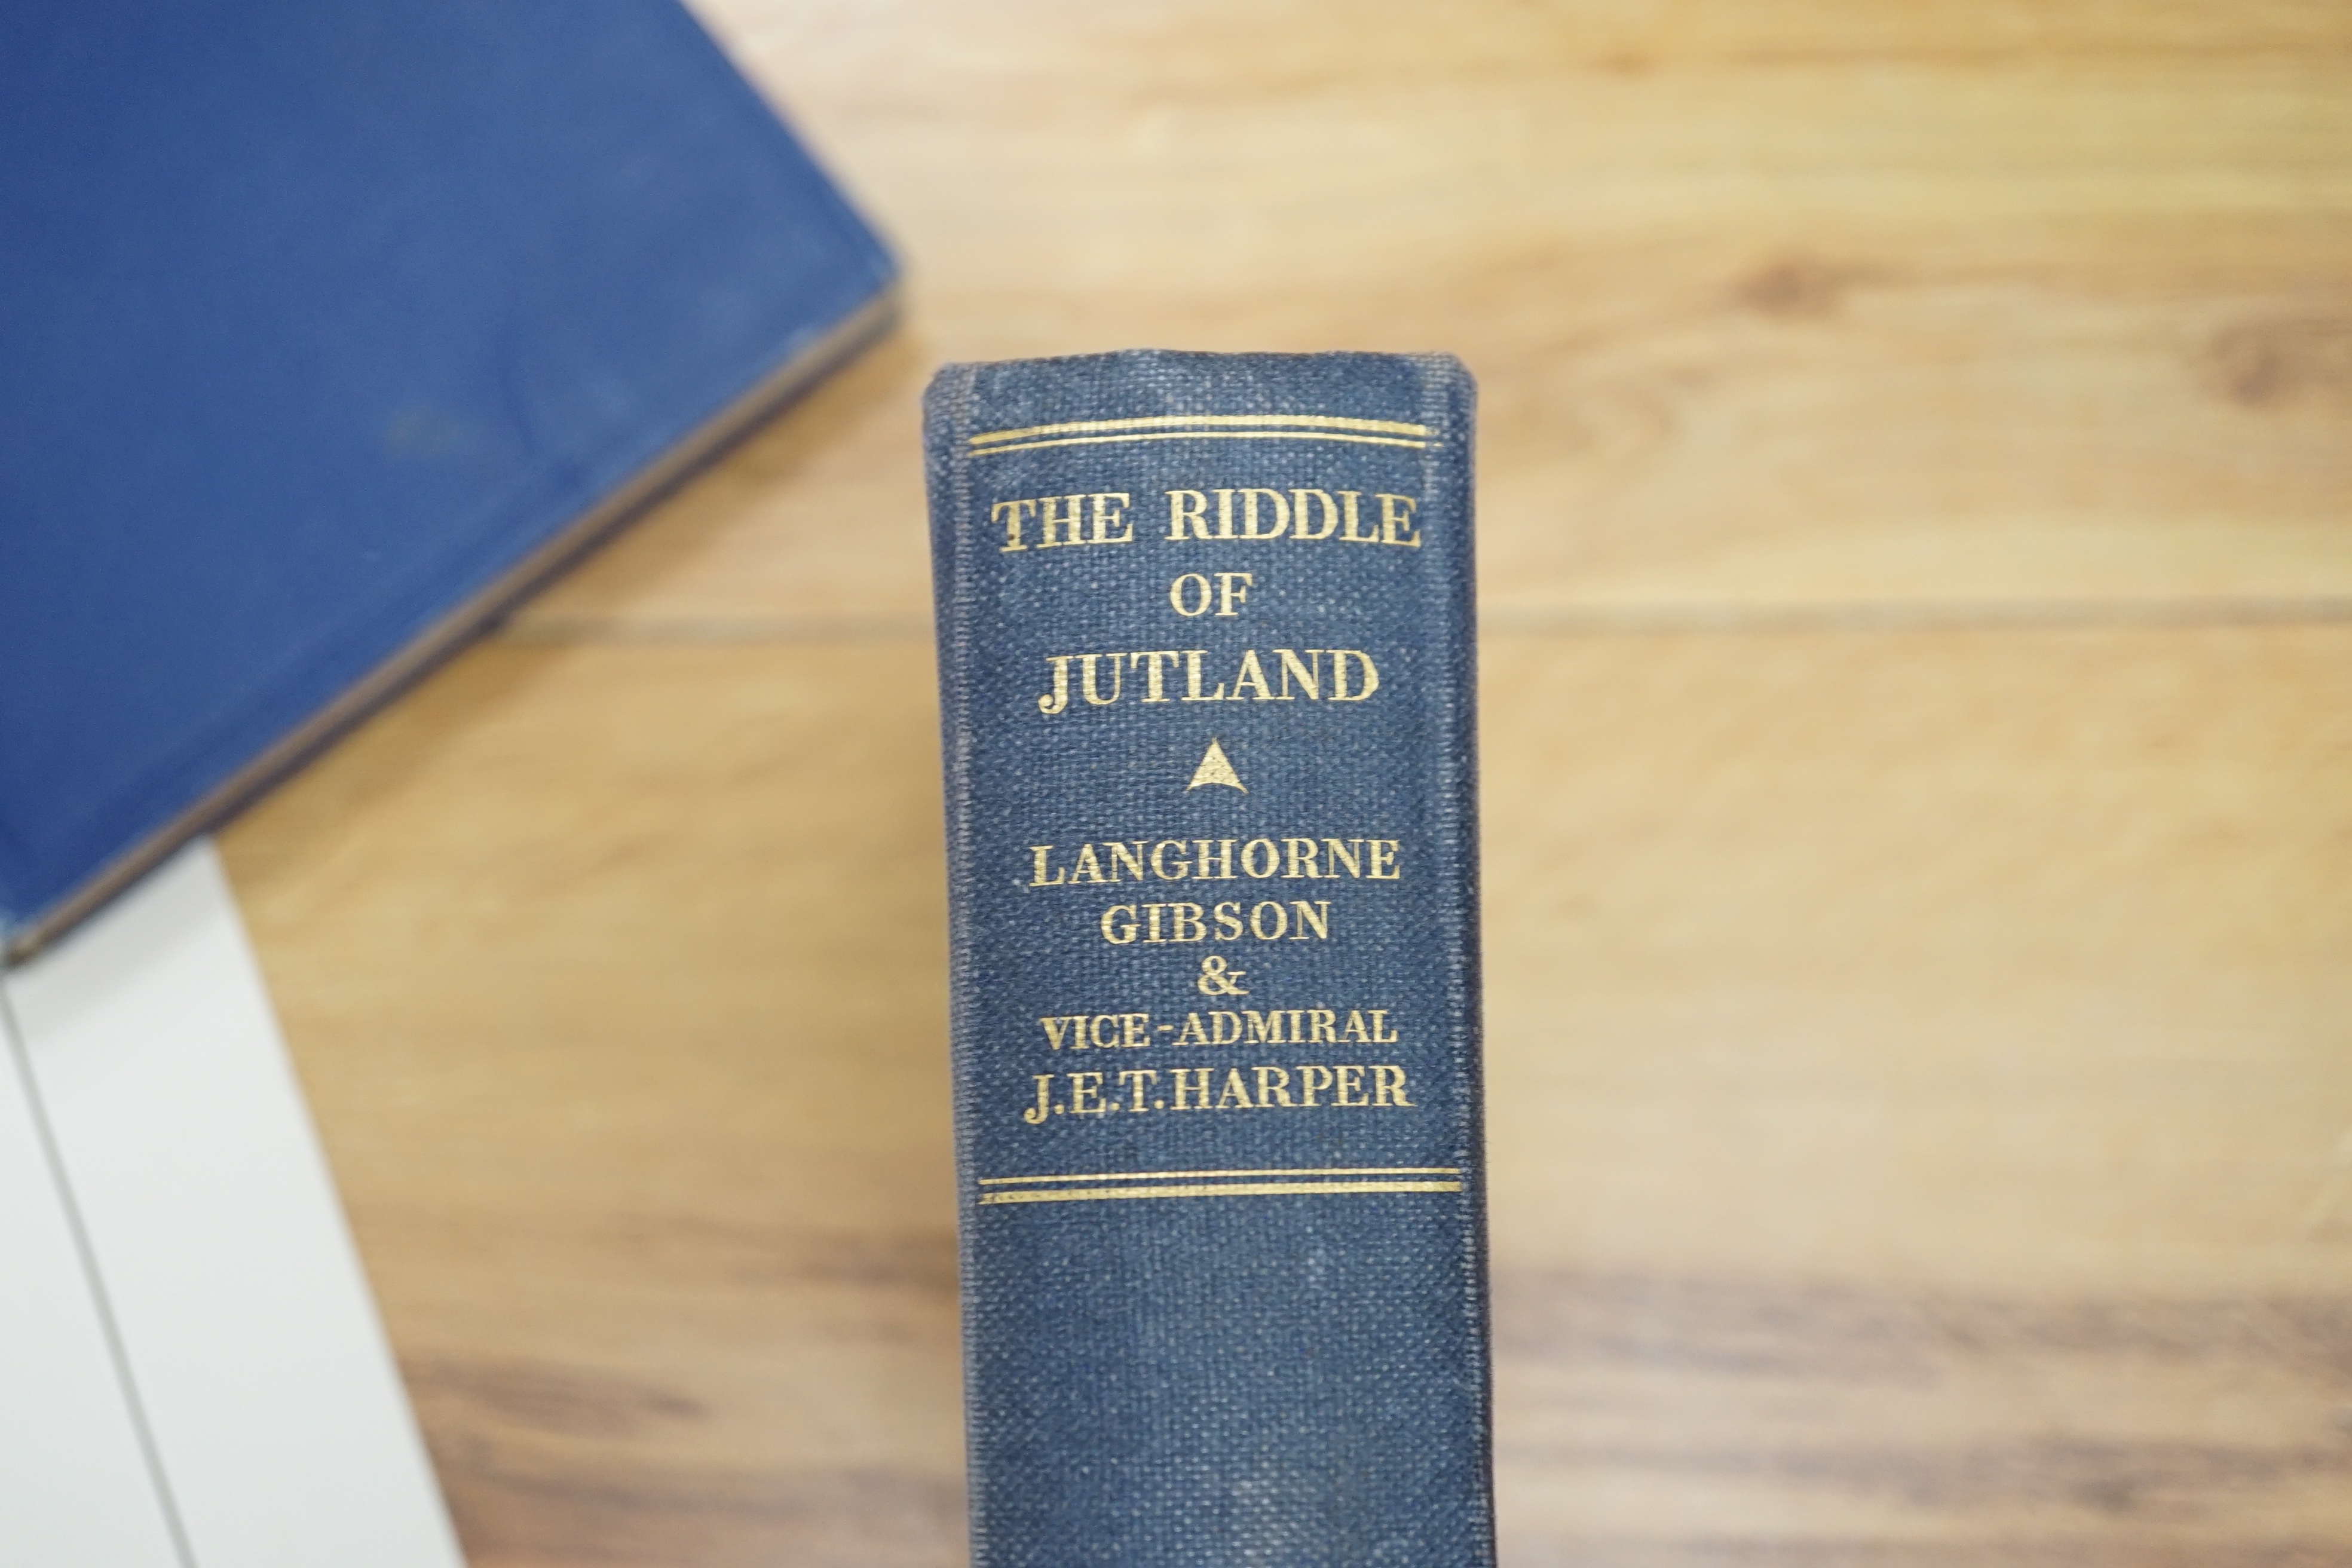 Narrative of the Battle of Jutland published by His Majesty's Stationery Office, 1924; 'The Riddle of Jutland, Langhorne Gibson and Vice Admiral J.E.T. Harper, 1934, together with 'Battle of Jutland Official Despatches a